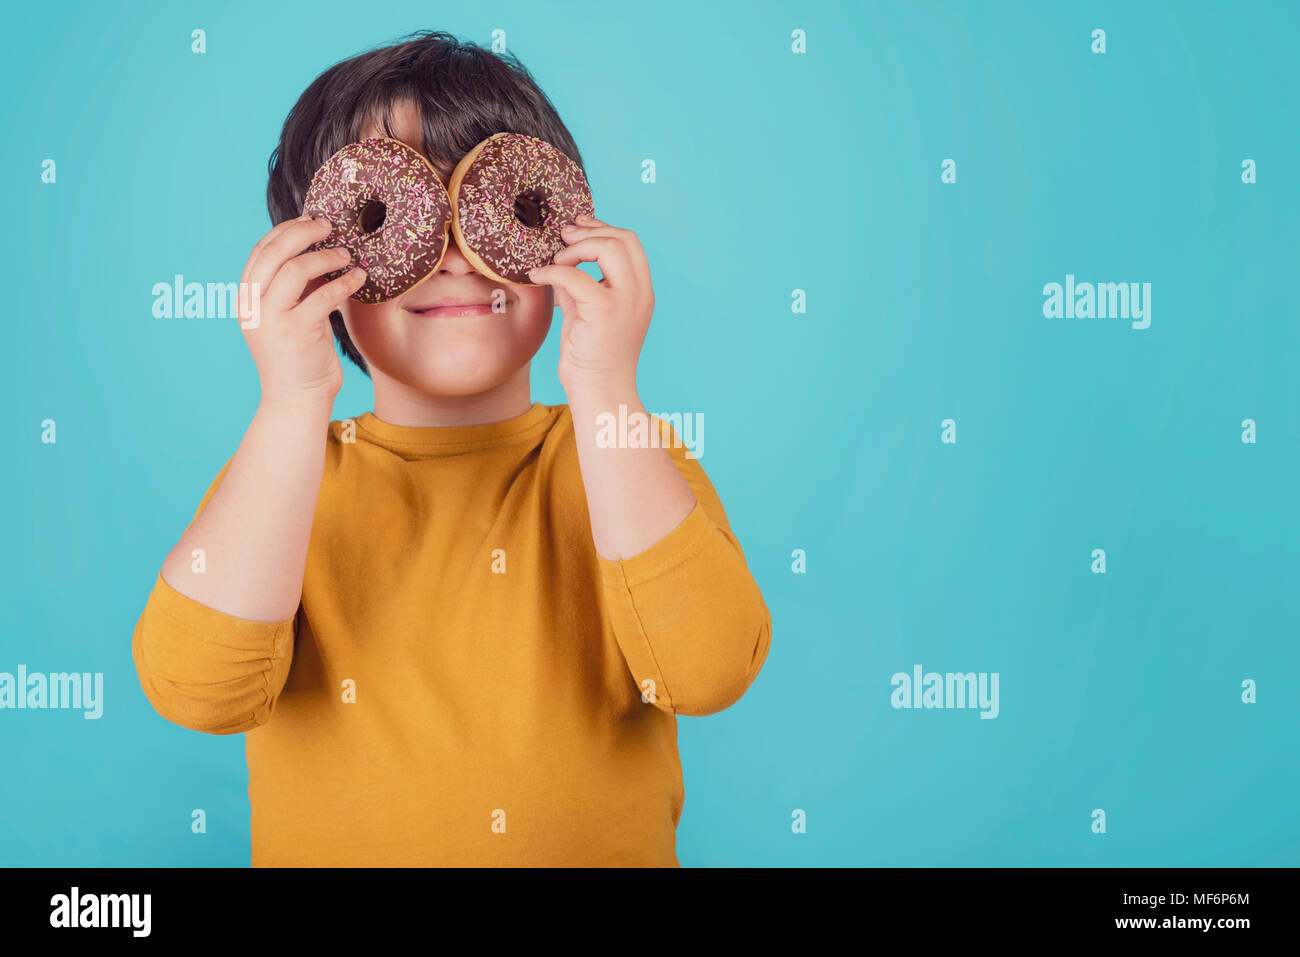 smiling boy holding donuts over her eyes Stock Photo